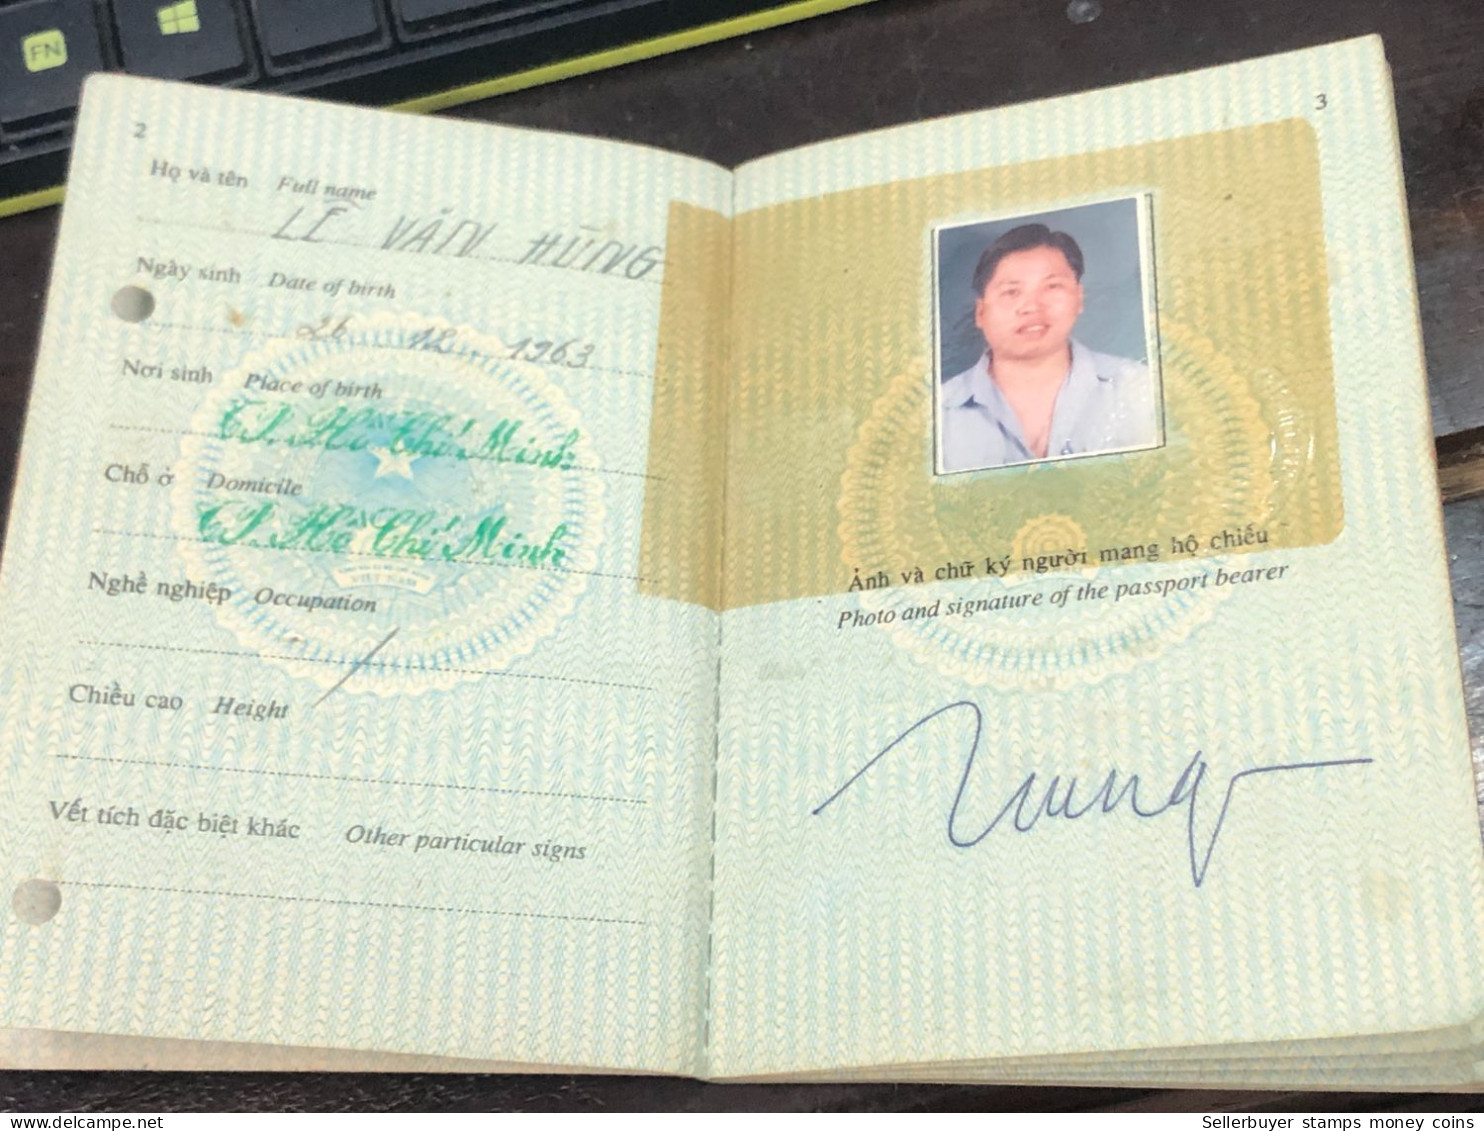 VIET NAM -OLD-ID PASSPORT-name-LE VAN HUNG-2001-1pcs Book - Collections